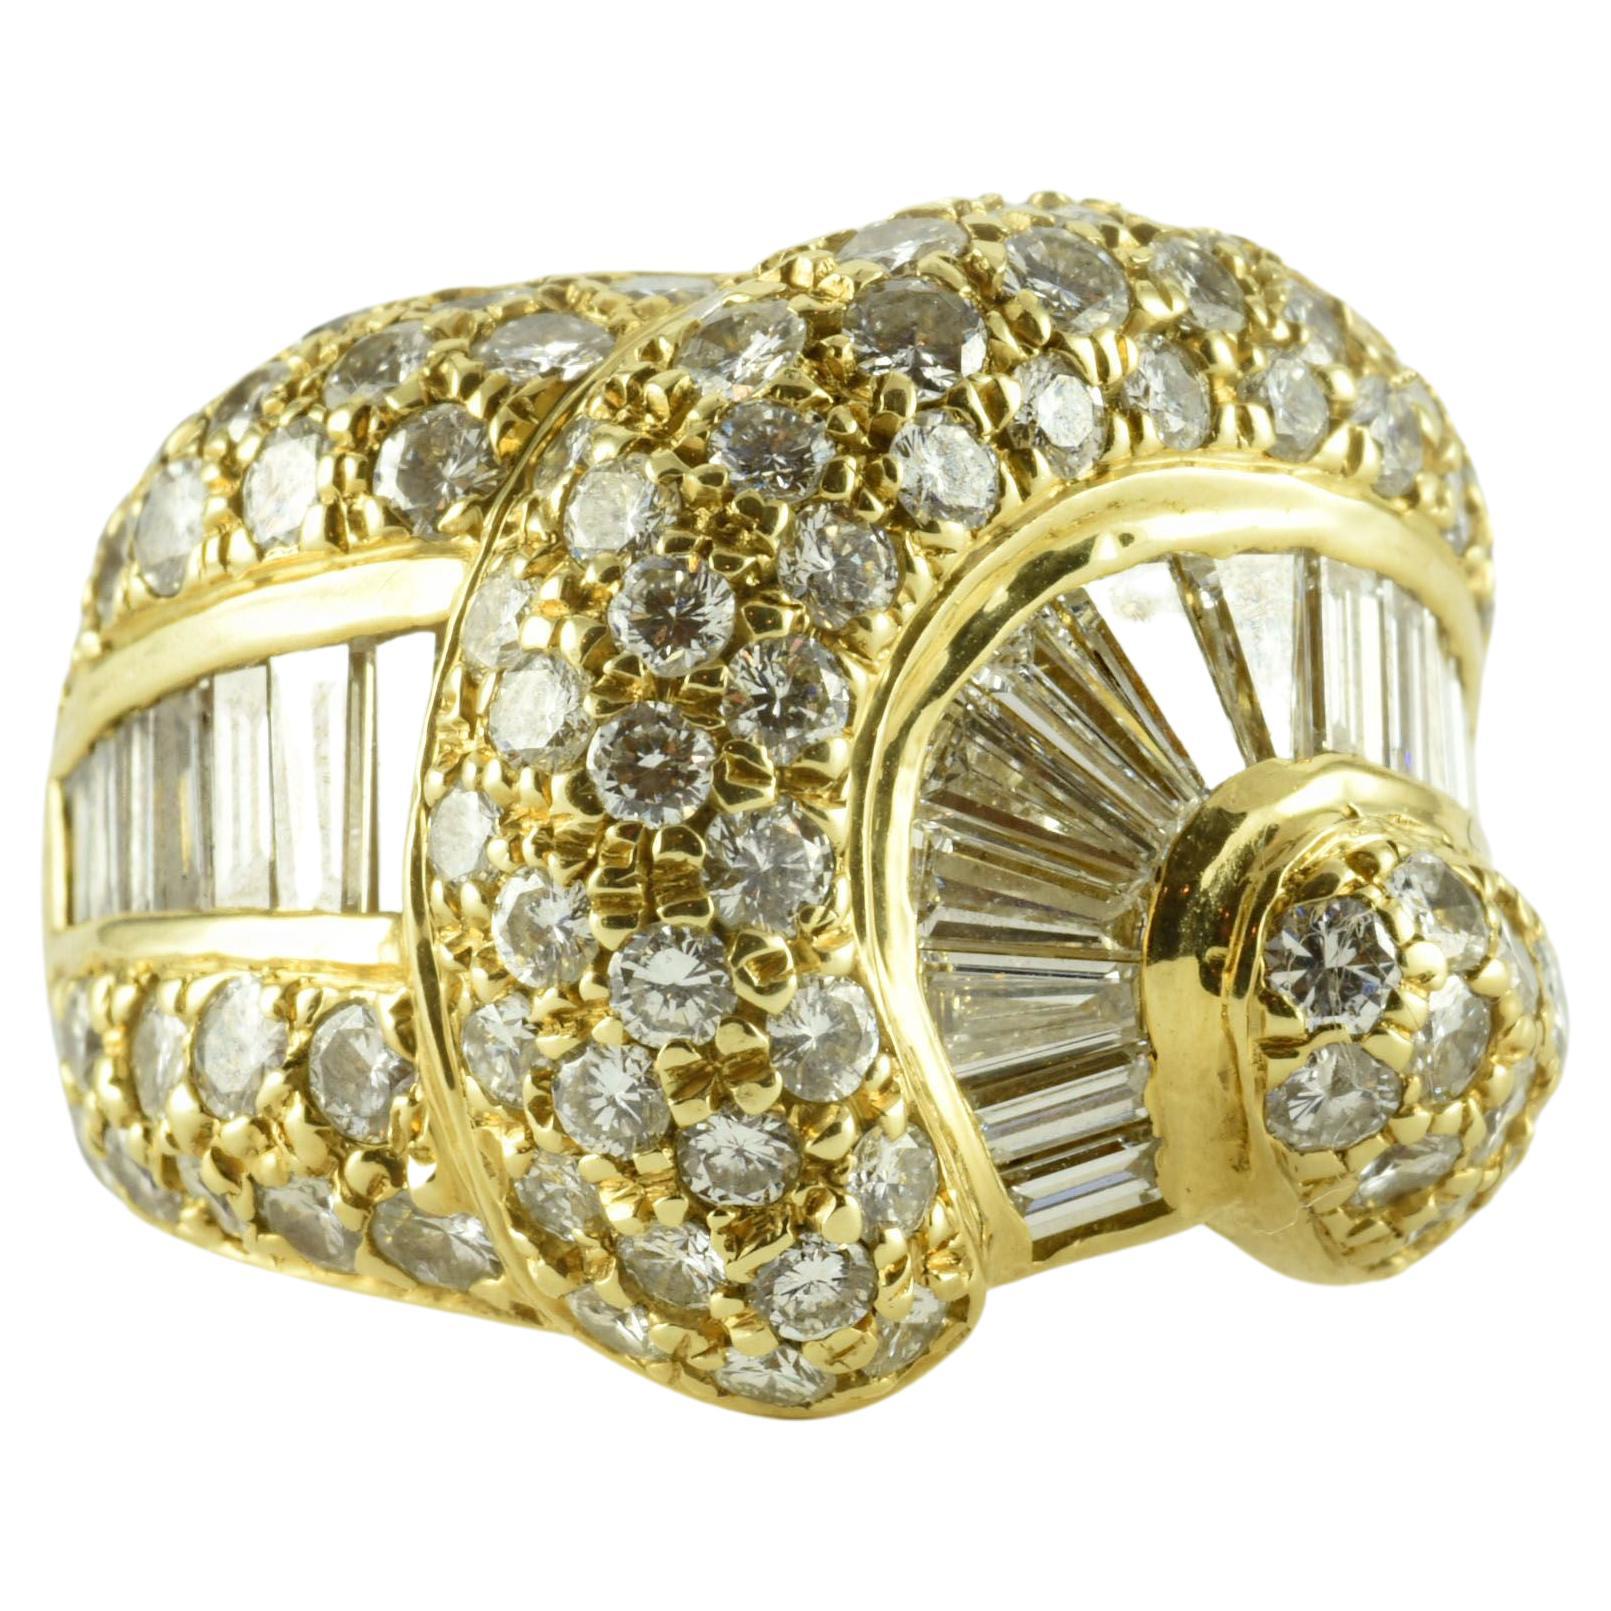 JB Star Diamond and 18kt Yellow Gold Cocktail Ring